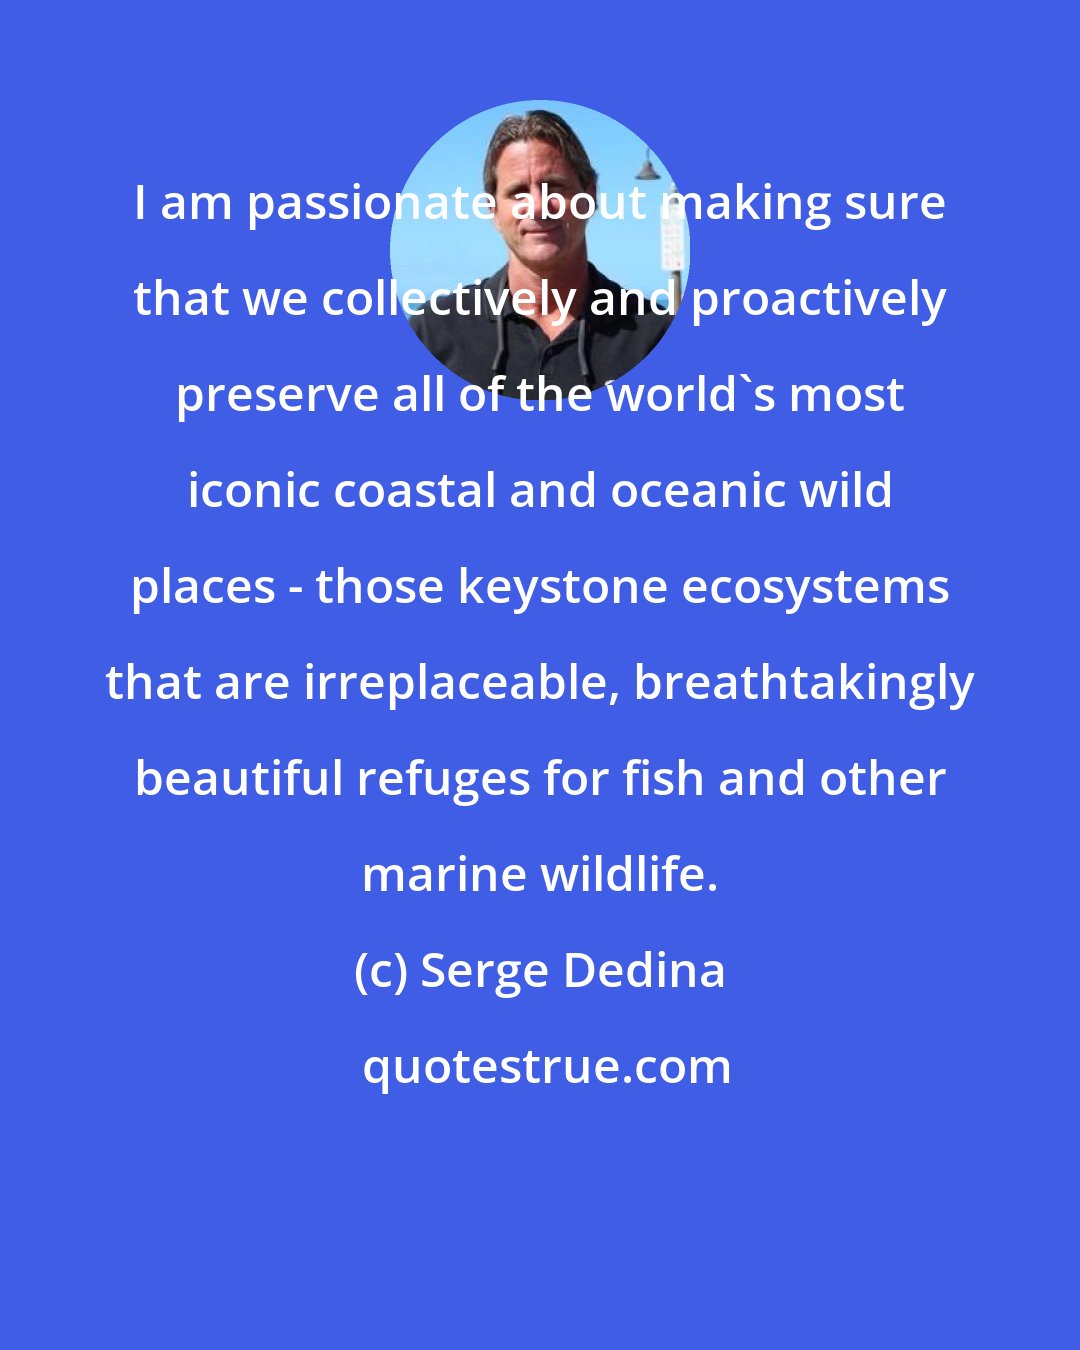 Serge Dedina: I am passionate about making sure that we collectively and proactively preserve all of the world's most iconic coastal and oceanic wild places - those keystone ecosystems that are irreplaceable, breathtakingly beautiful refuges for fish and other marine wildlife.